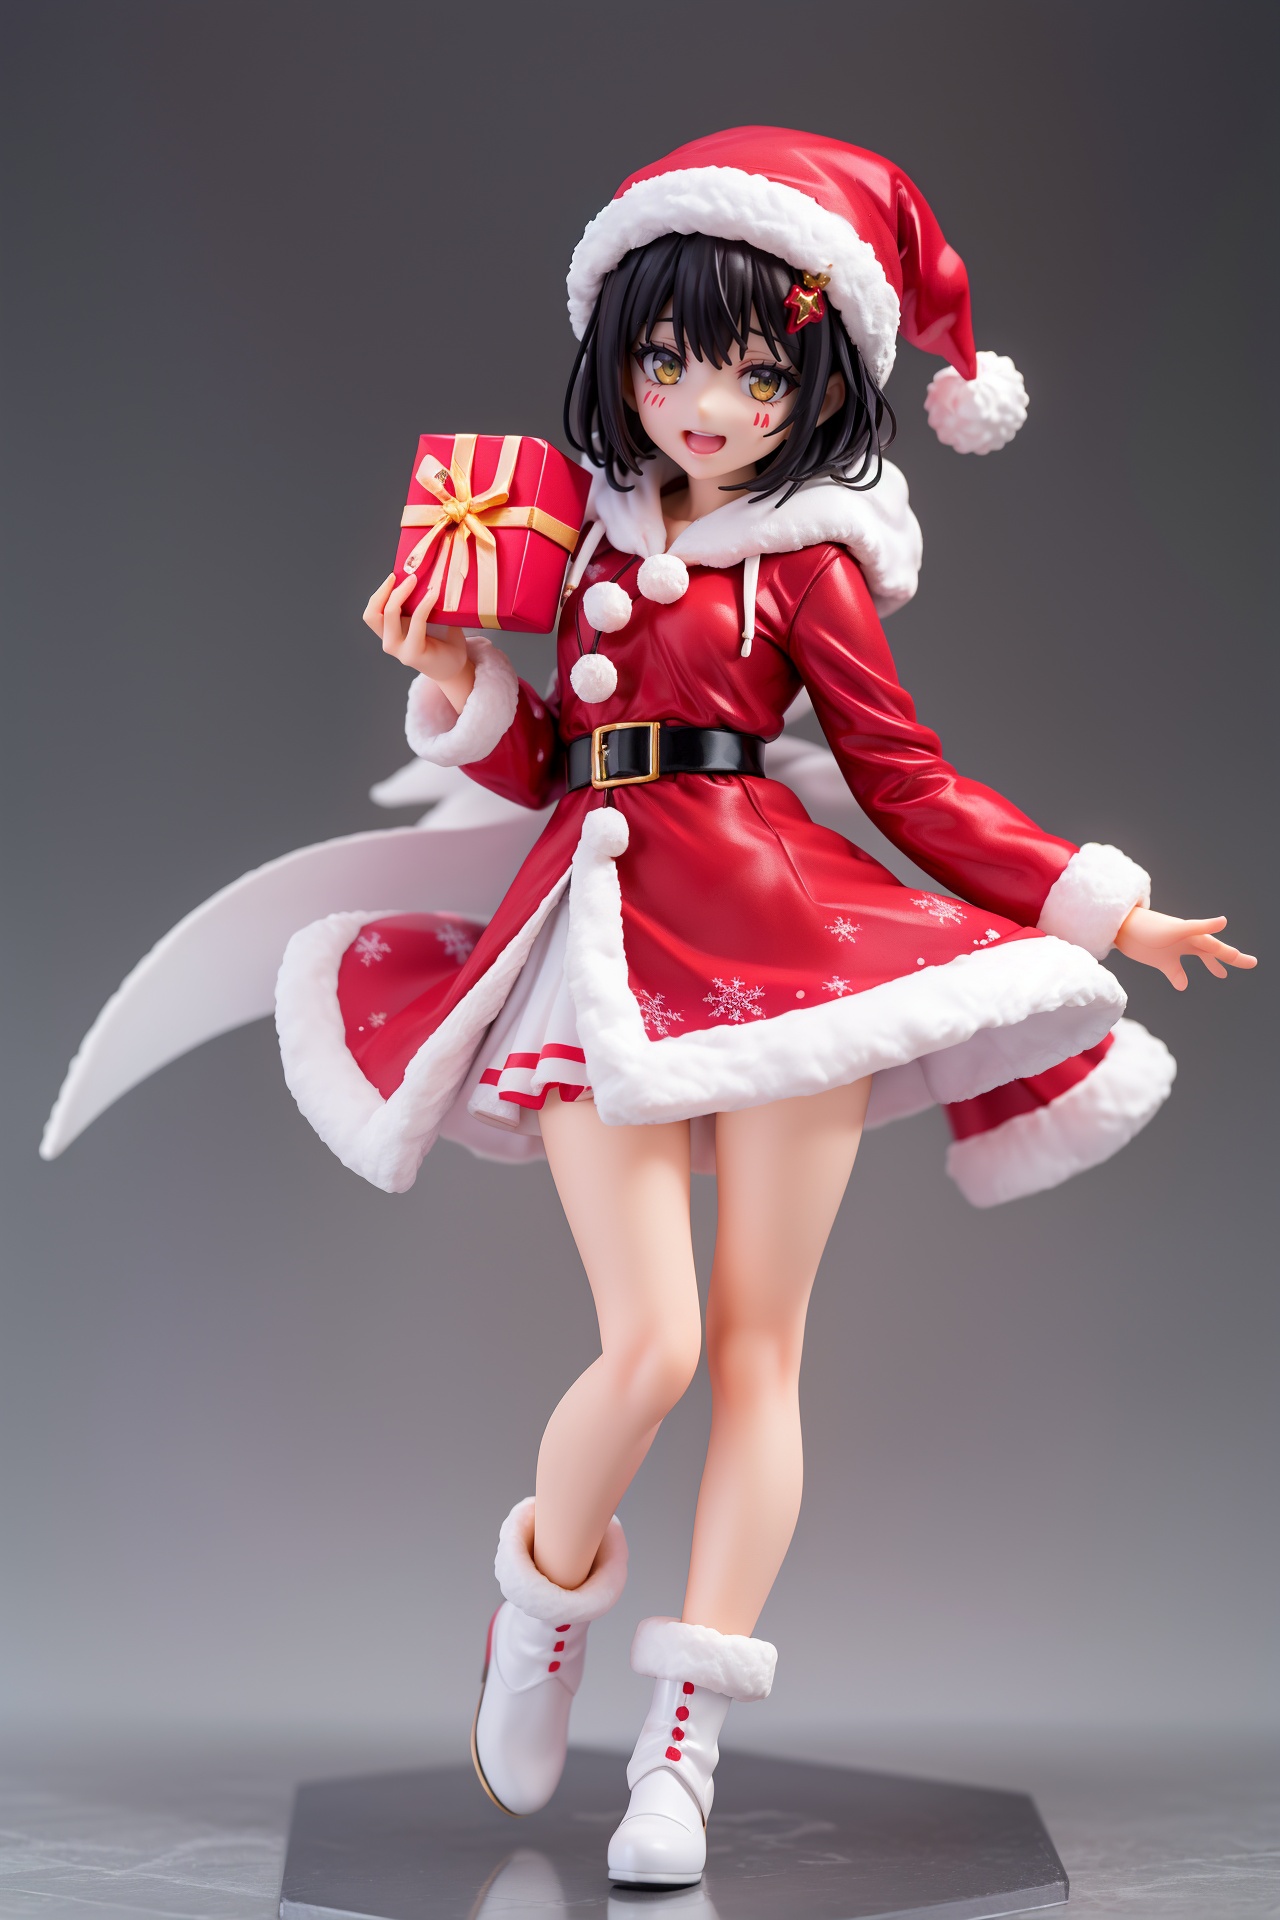 pvc style,(red-long-santa-coat, white-silk-long-skirt-dress hooded-black-hair amber-yellow-eyes happy jester laugh-face painted girl is throwing a giftbox),figma,giftshop outdoors  (bokeh, beautiful diamond dust),snowflake,north star,full body,